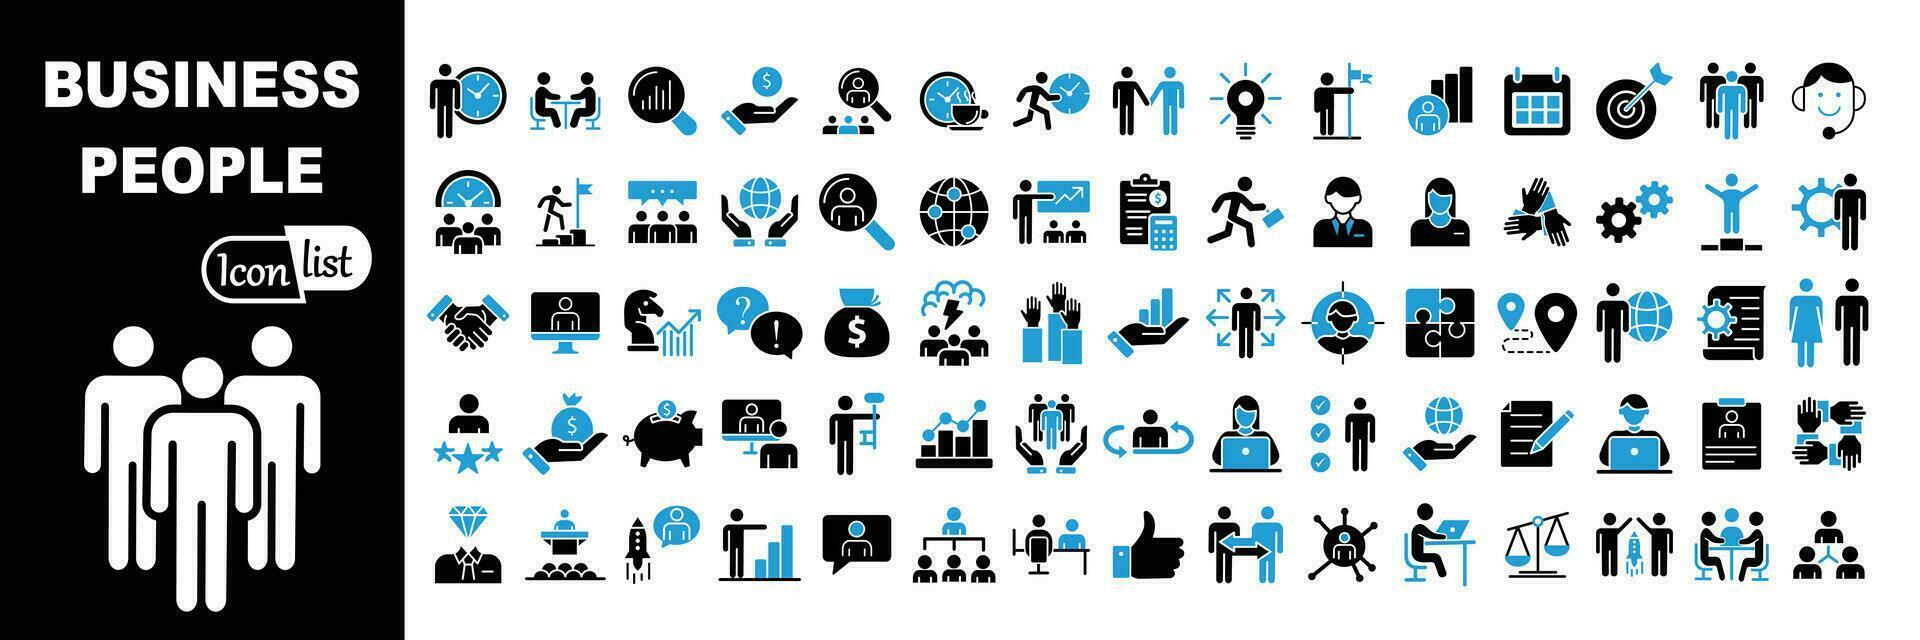 Business people, human resources, office management - web icon . vector illustration.